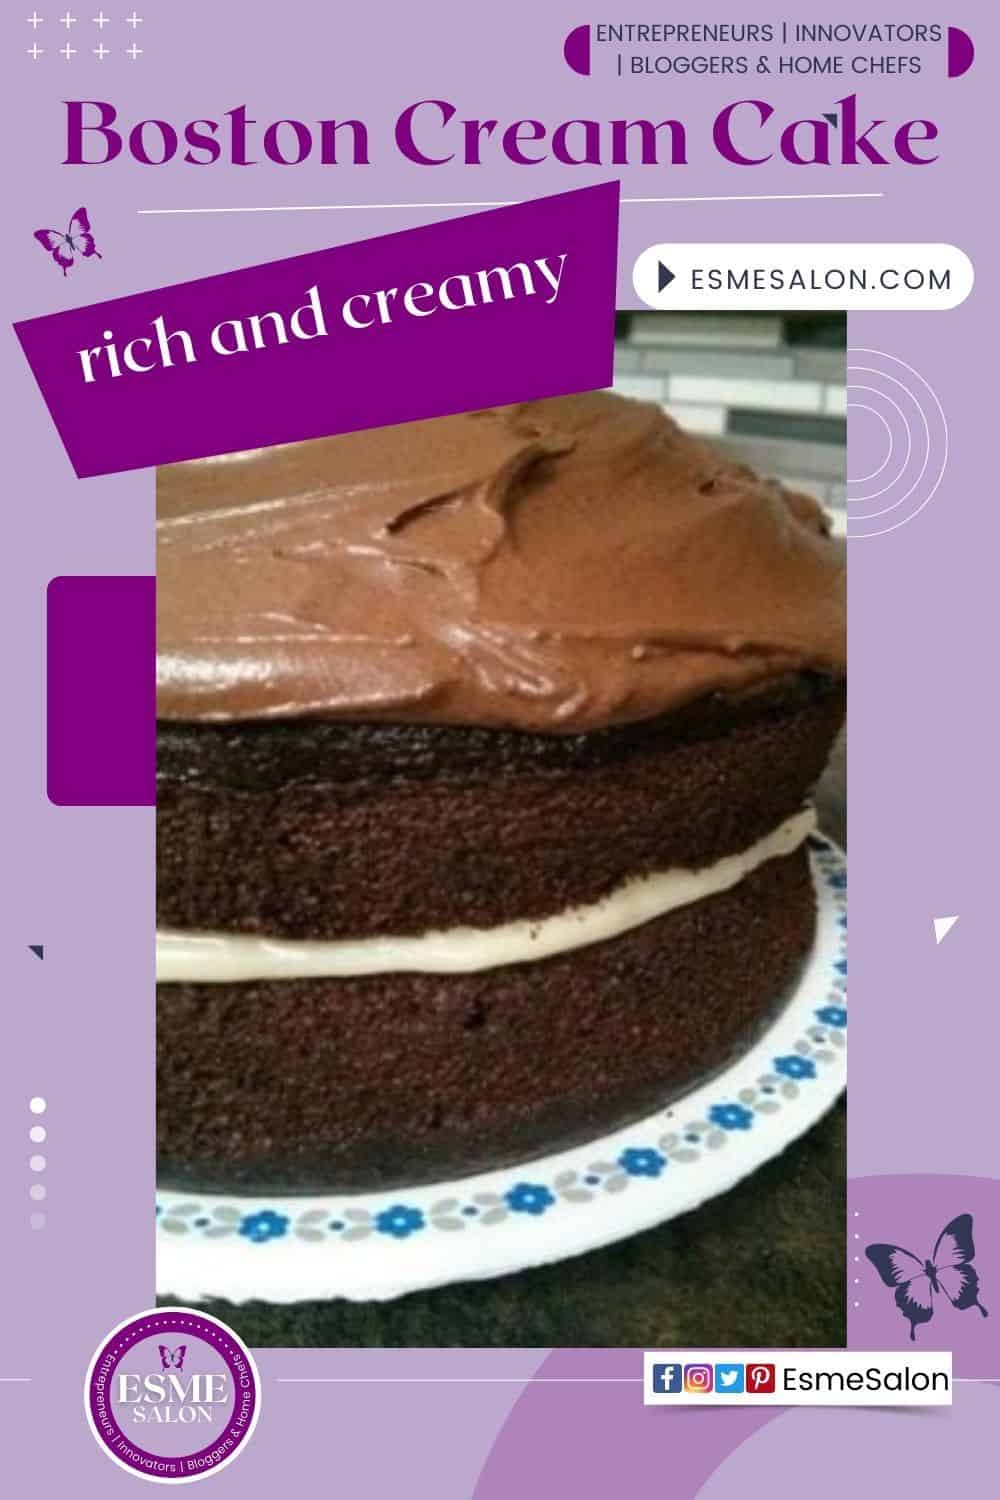 A double layered chocolate cake with white frosting in the middle and chocolate topping